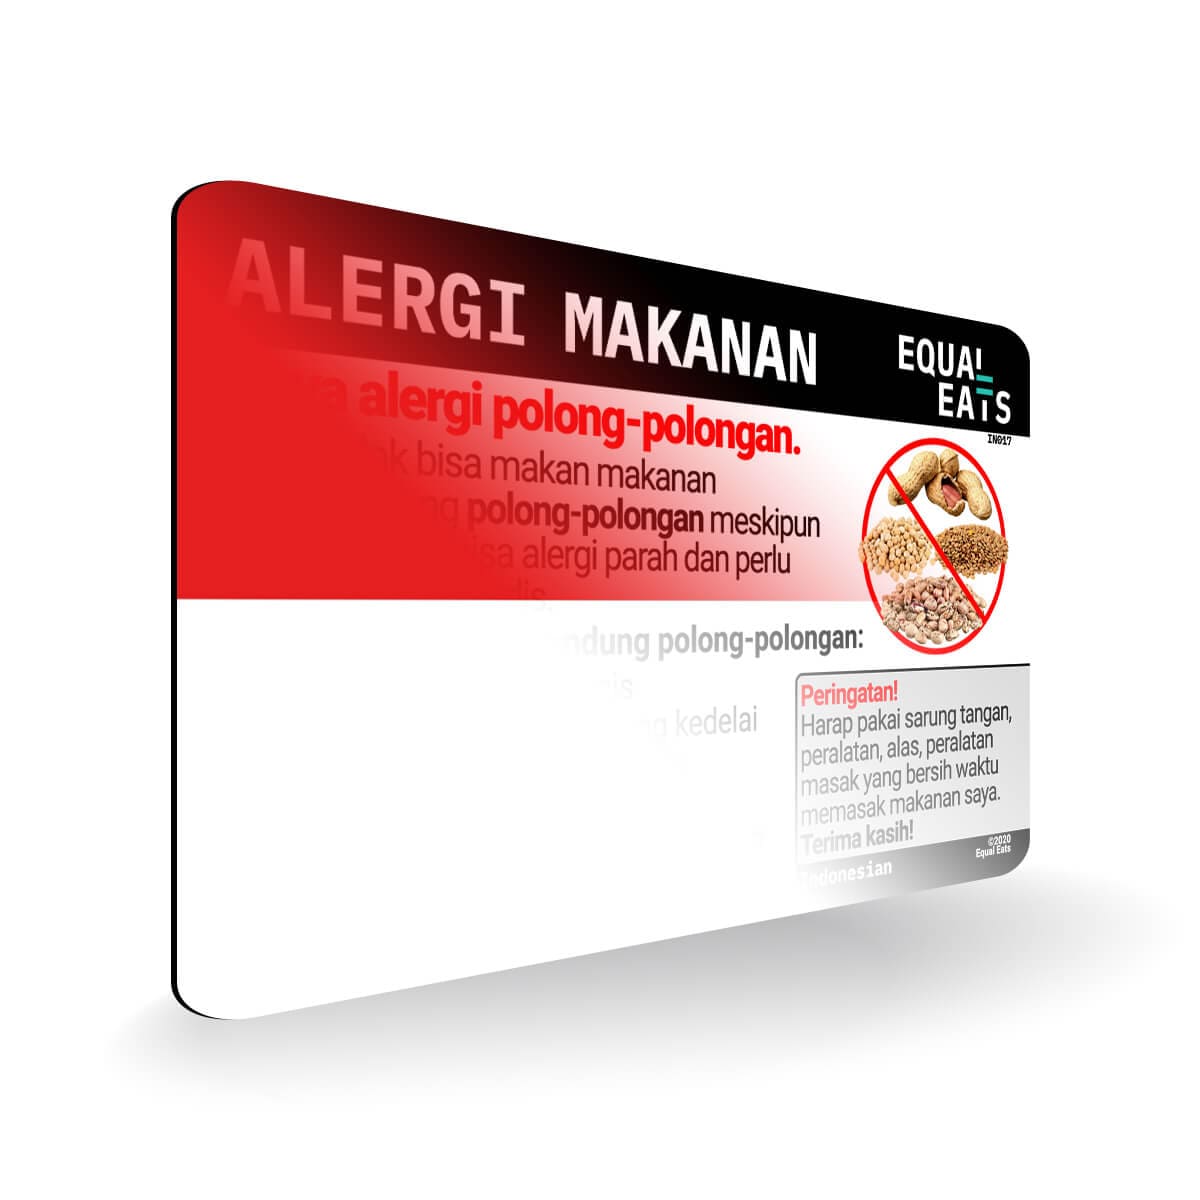 Legume Allergy in Indonesian. Legume Allergy Card for Indonesia